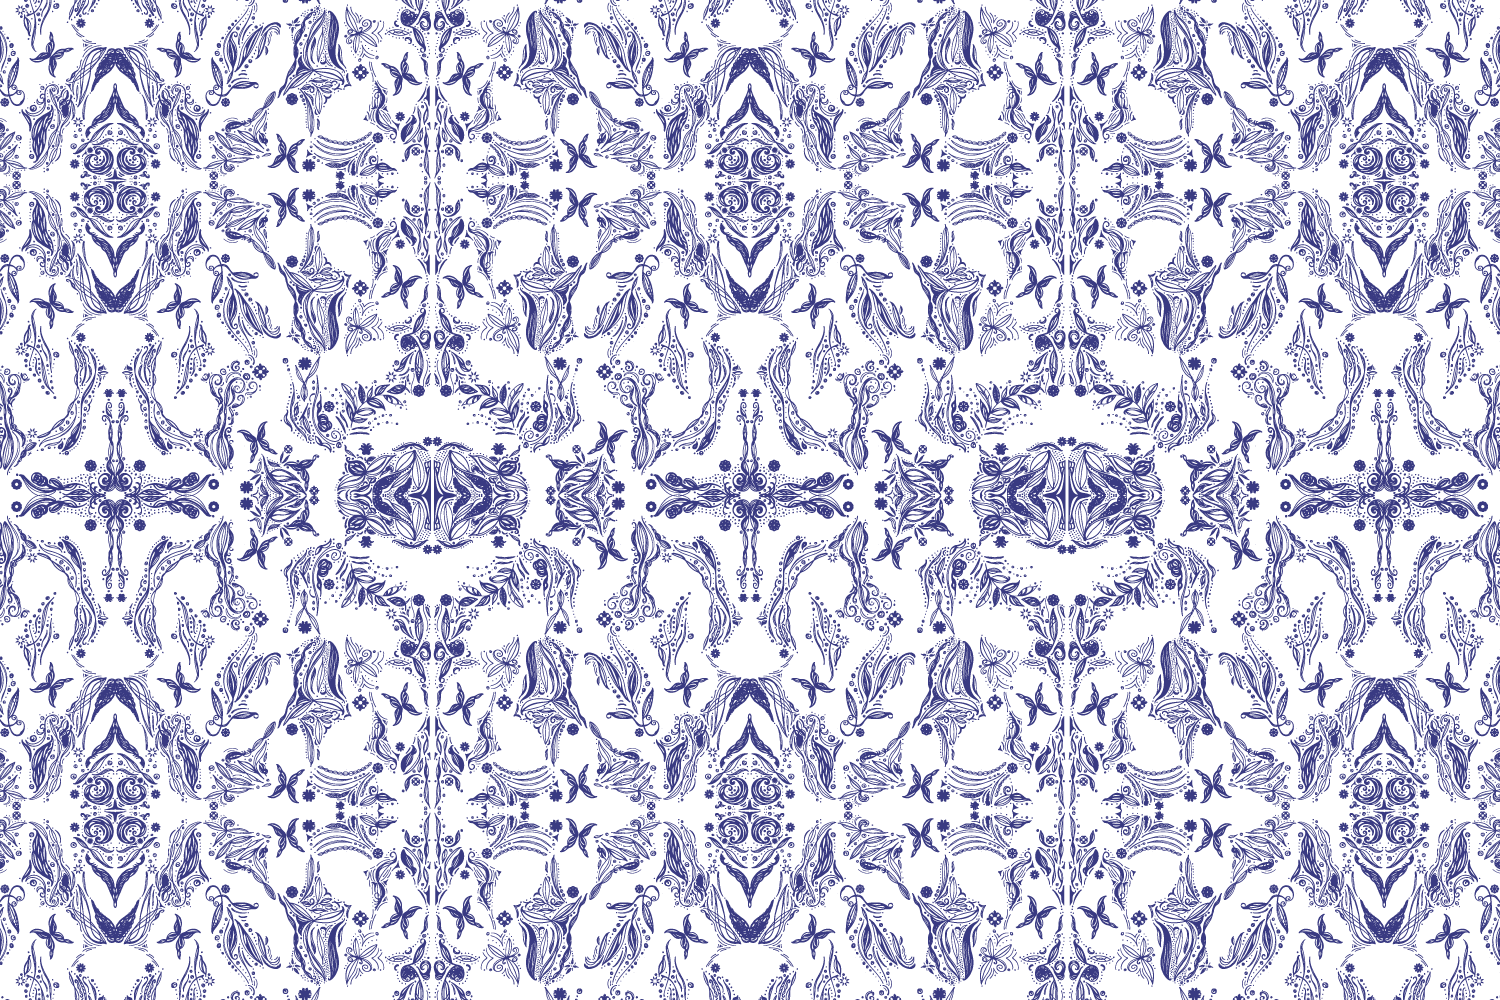 Overgrown_Ornate_Pattern_1500px_x_1000px-10.png